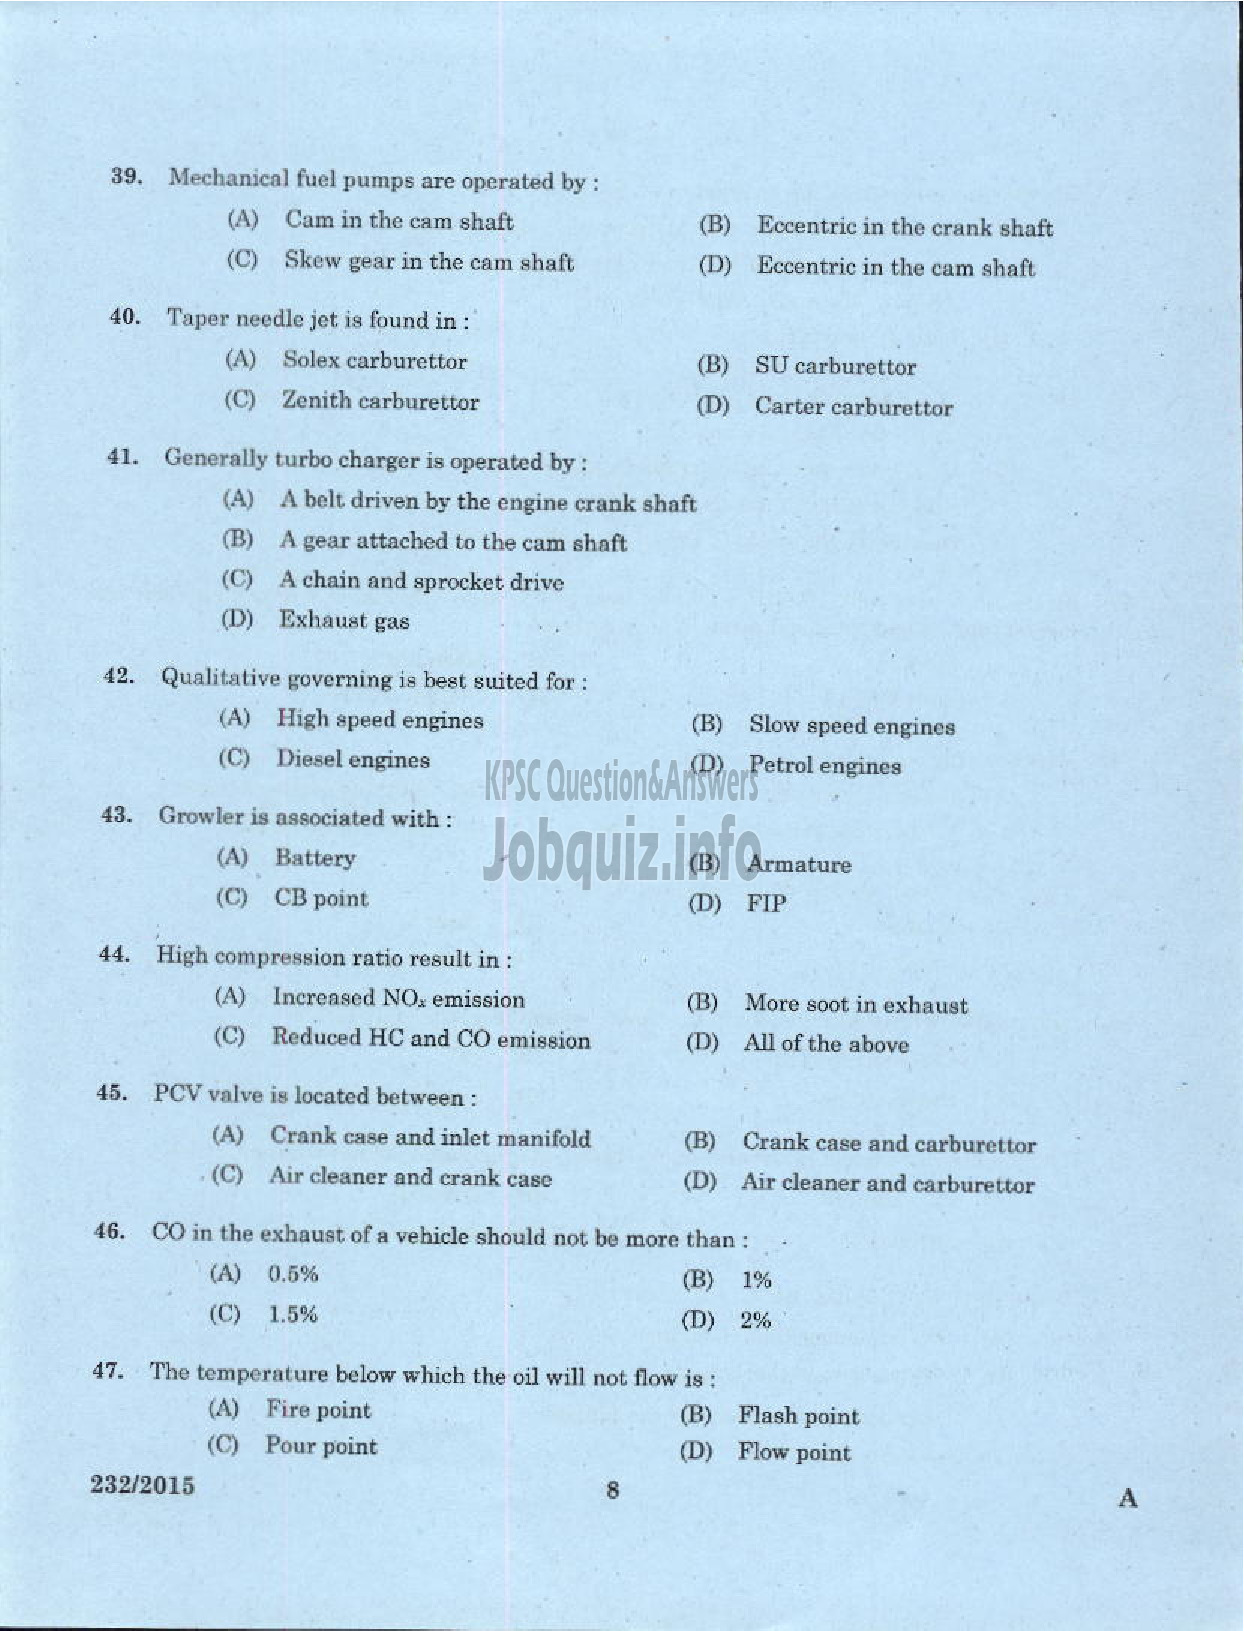 Kerala PSC Question Paper - MOTOR MECHANIC/STORE ASSISTANT GROUND WATER-6